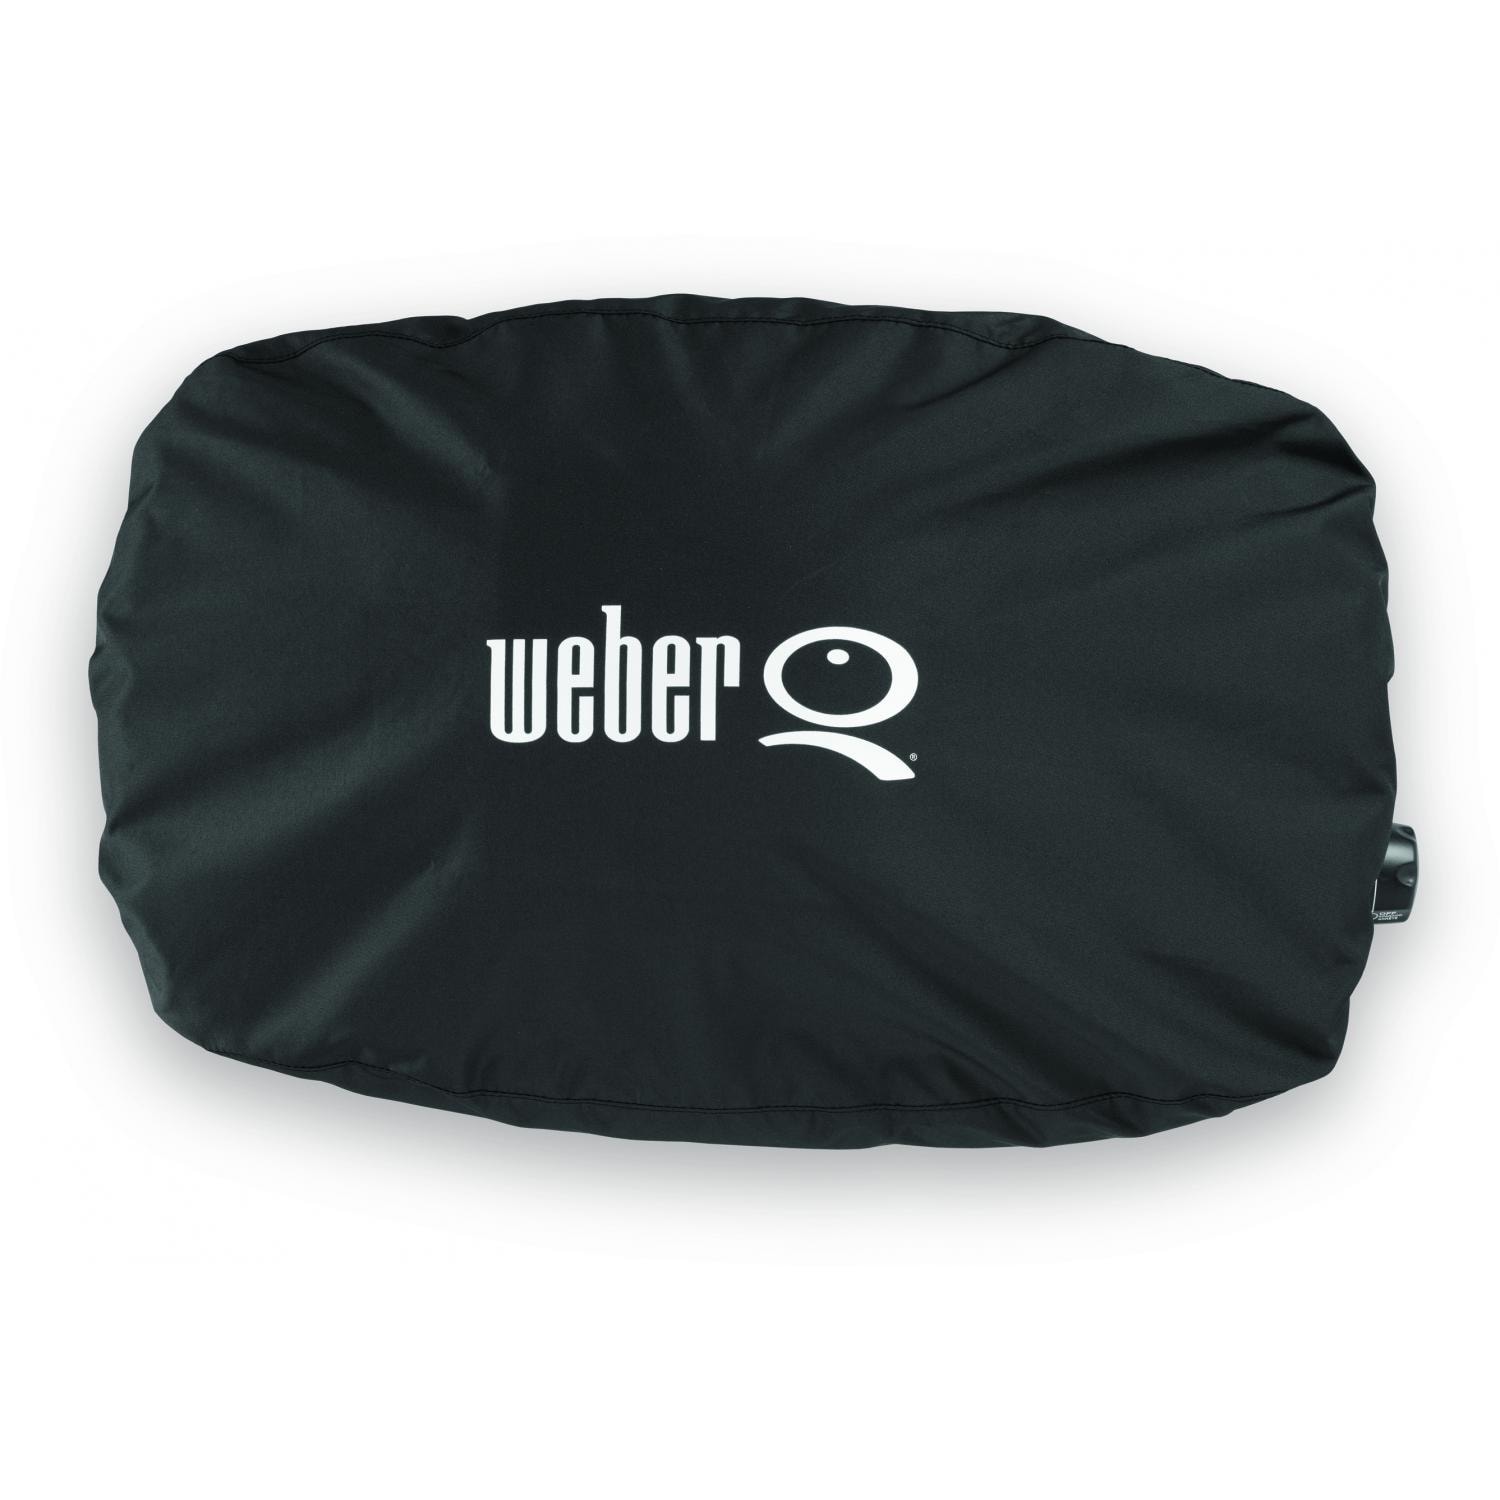 Weber Q Series Bonnet Grill Cover - image 2 of 3